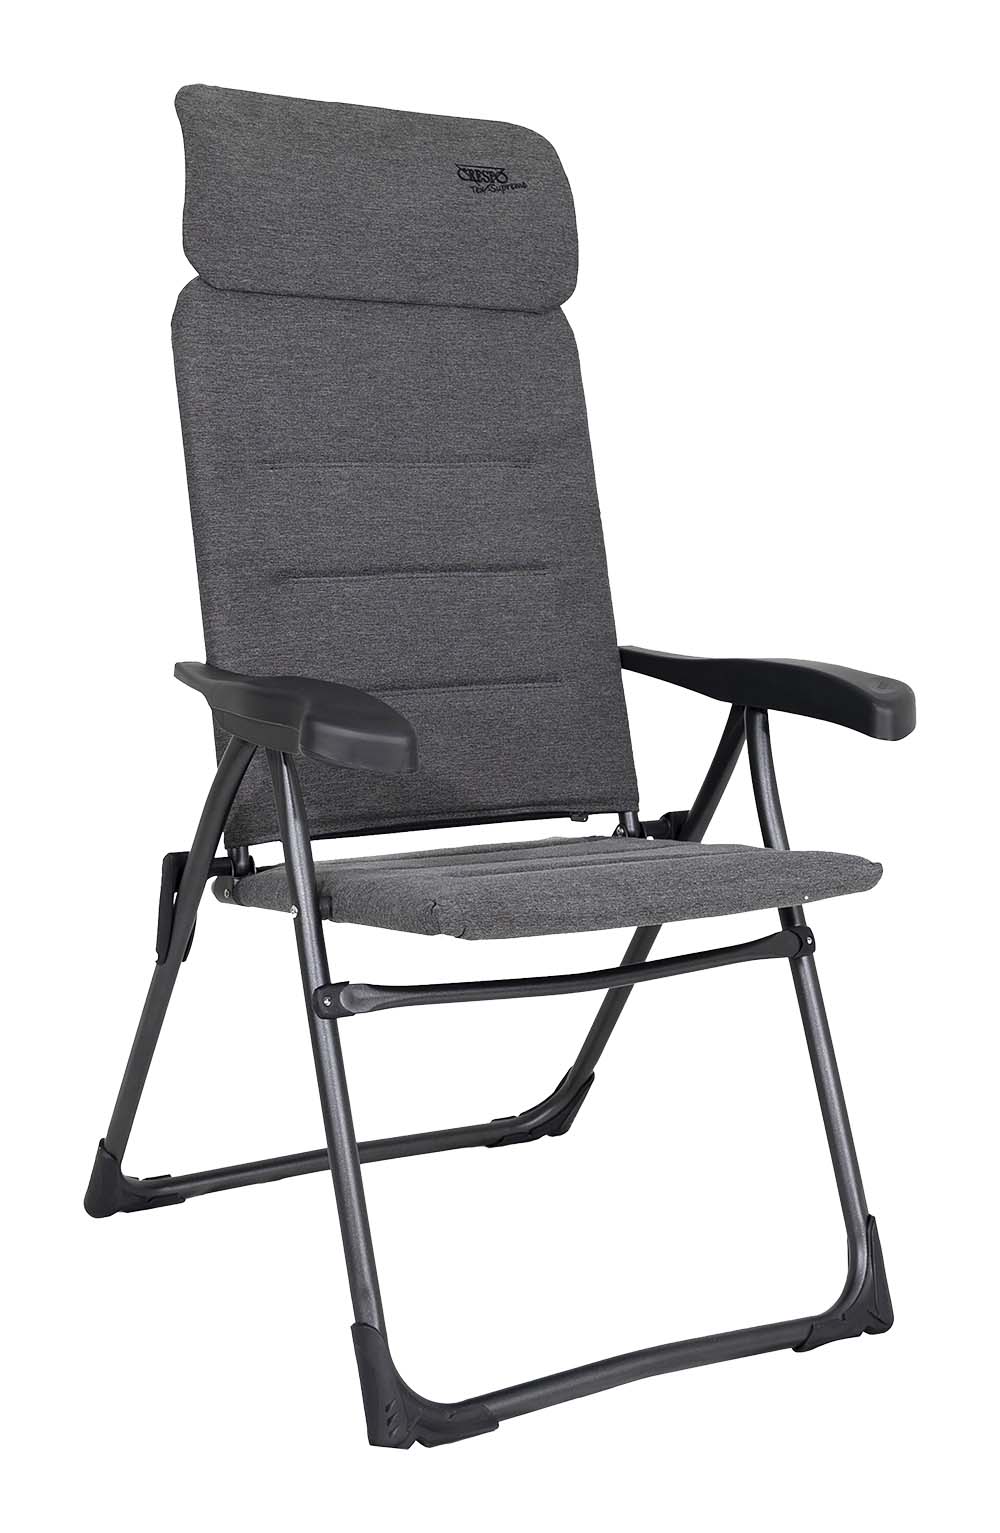 1148010 An extremely compact beach chair. The chair can be folded flat, only 5 cm thick. This is why this chair is also known as the flattest camping chair. This chair offers maximum comfort with its 7-position adjustable backrest and infinitely adjustable headrest. This chair is covered with Tex-Comfort fabric. This comfortable fabric is easy to maintain, resistant to discolouration by the sun and water repellent. As a result, the chair dries much more quickly than chairs with traditional foam padding. In addition, this fabric surrounds the frame completely. This luxurious fabric is wrapped around the back of the seat tube and at the front, the fabric extends to the bottom, creating A comfortable seat. The chair has a U-frame with stabilisers and extra thick tubes for extra strength and stability. The retractable headrest makes this chair extra compact for storage. Up to 50% less packing volume compared to other camping chairs! The chair is of high quality with TÜV approval.